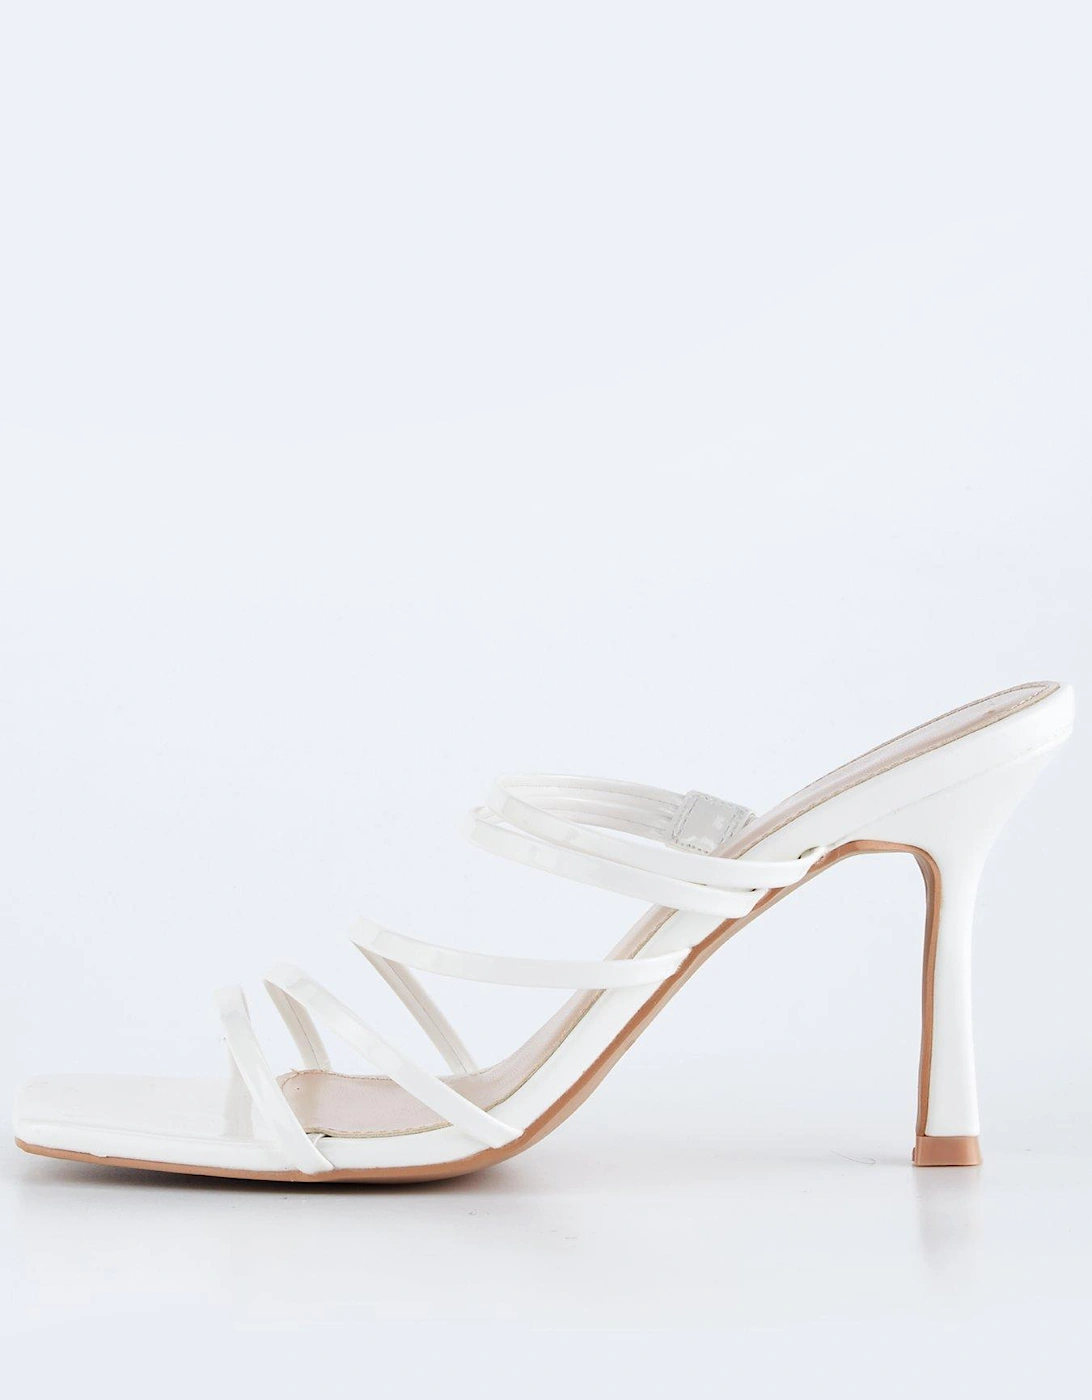 Christabel Strappy Front Heeled Sandal - White, 7 of 6